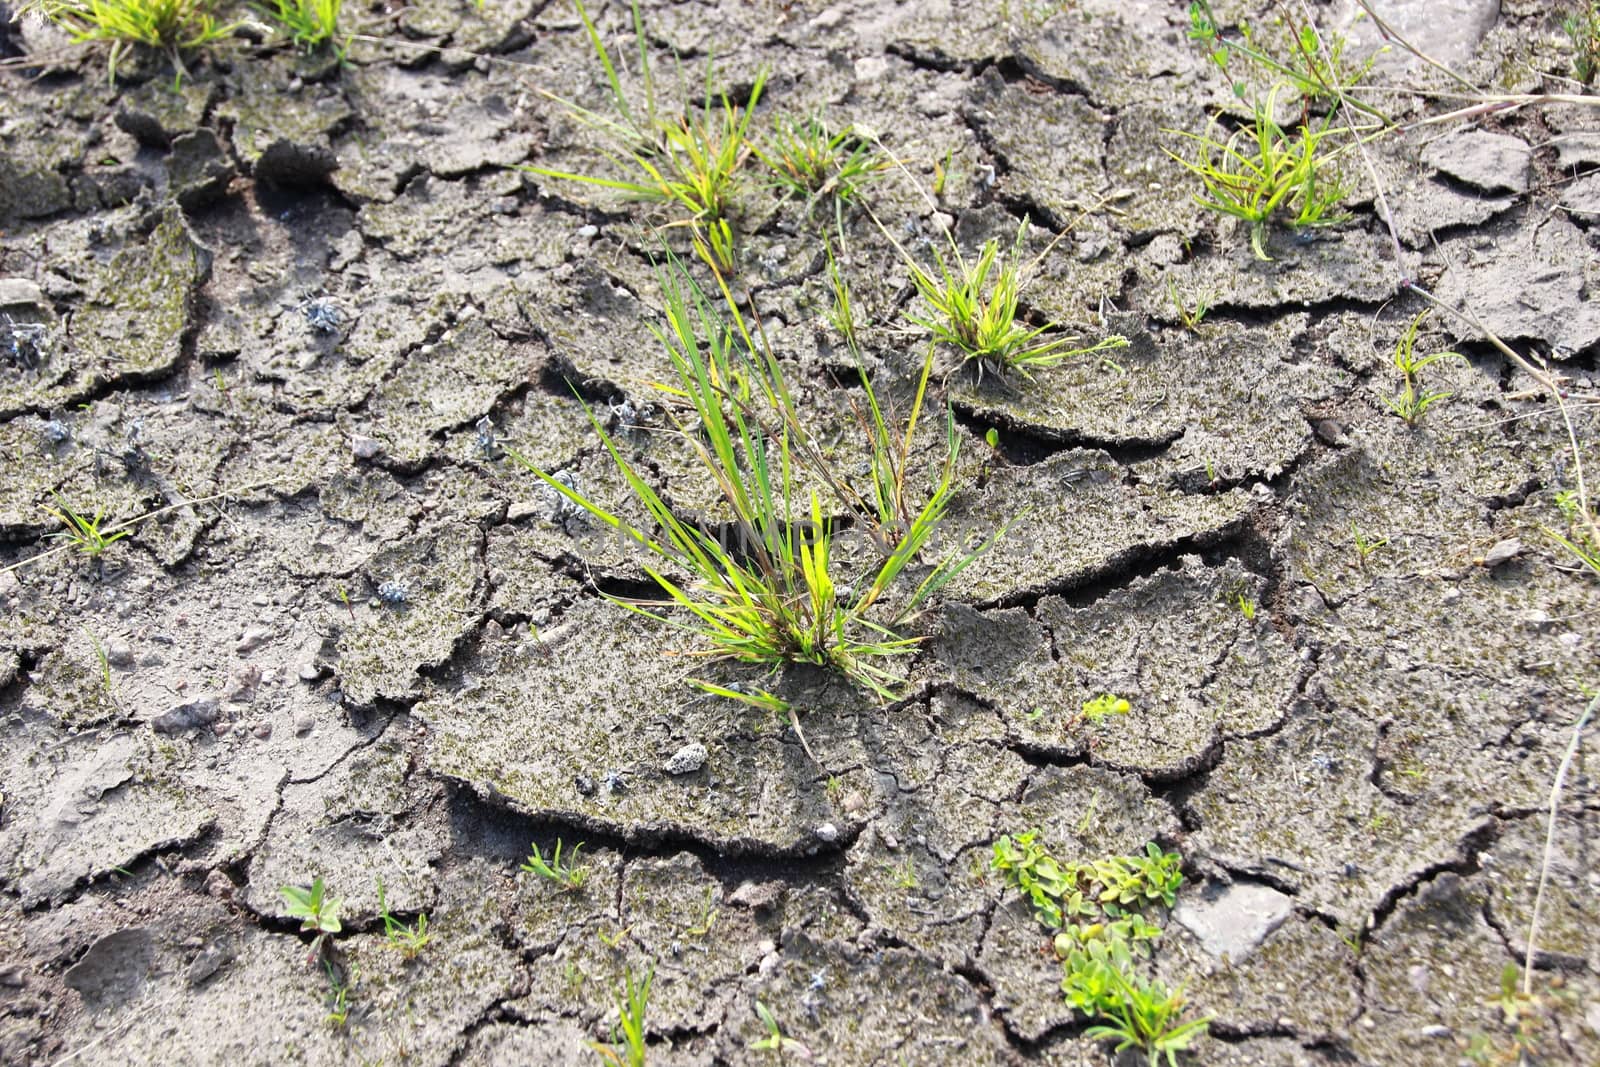 Dry cracked dirt ground with surviving green plant